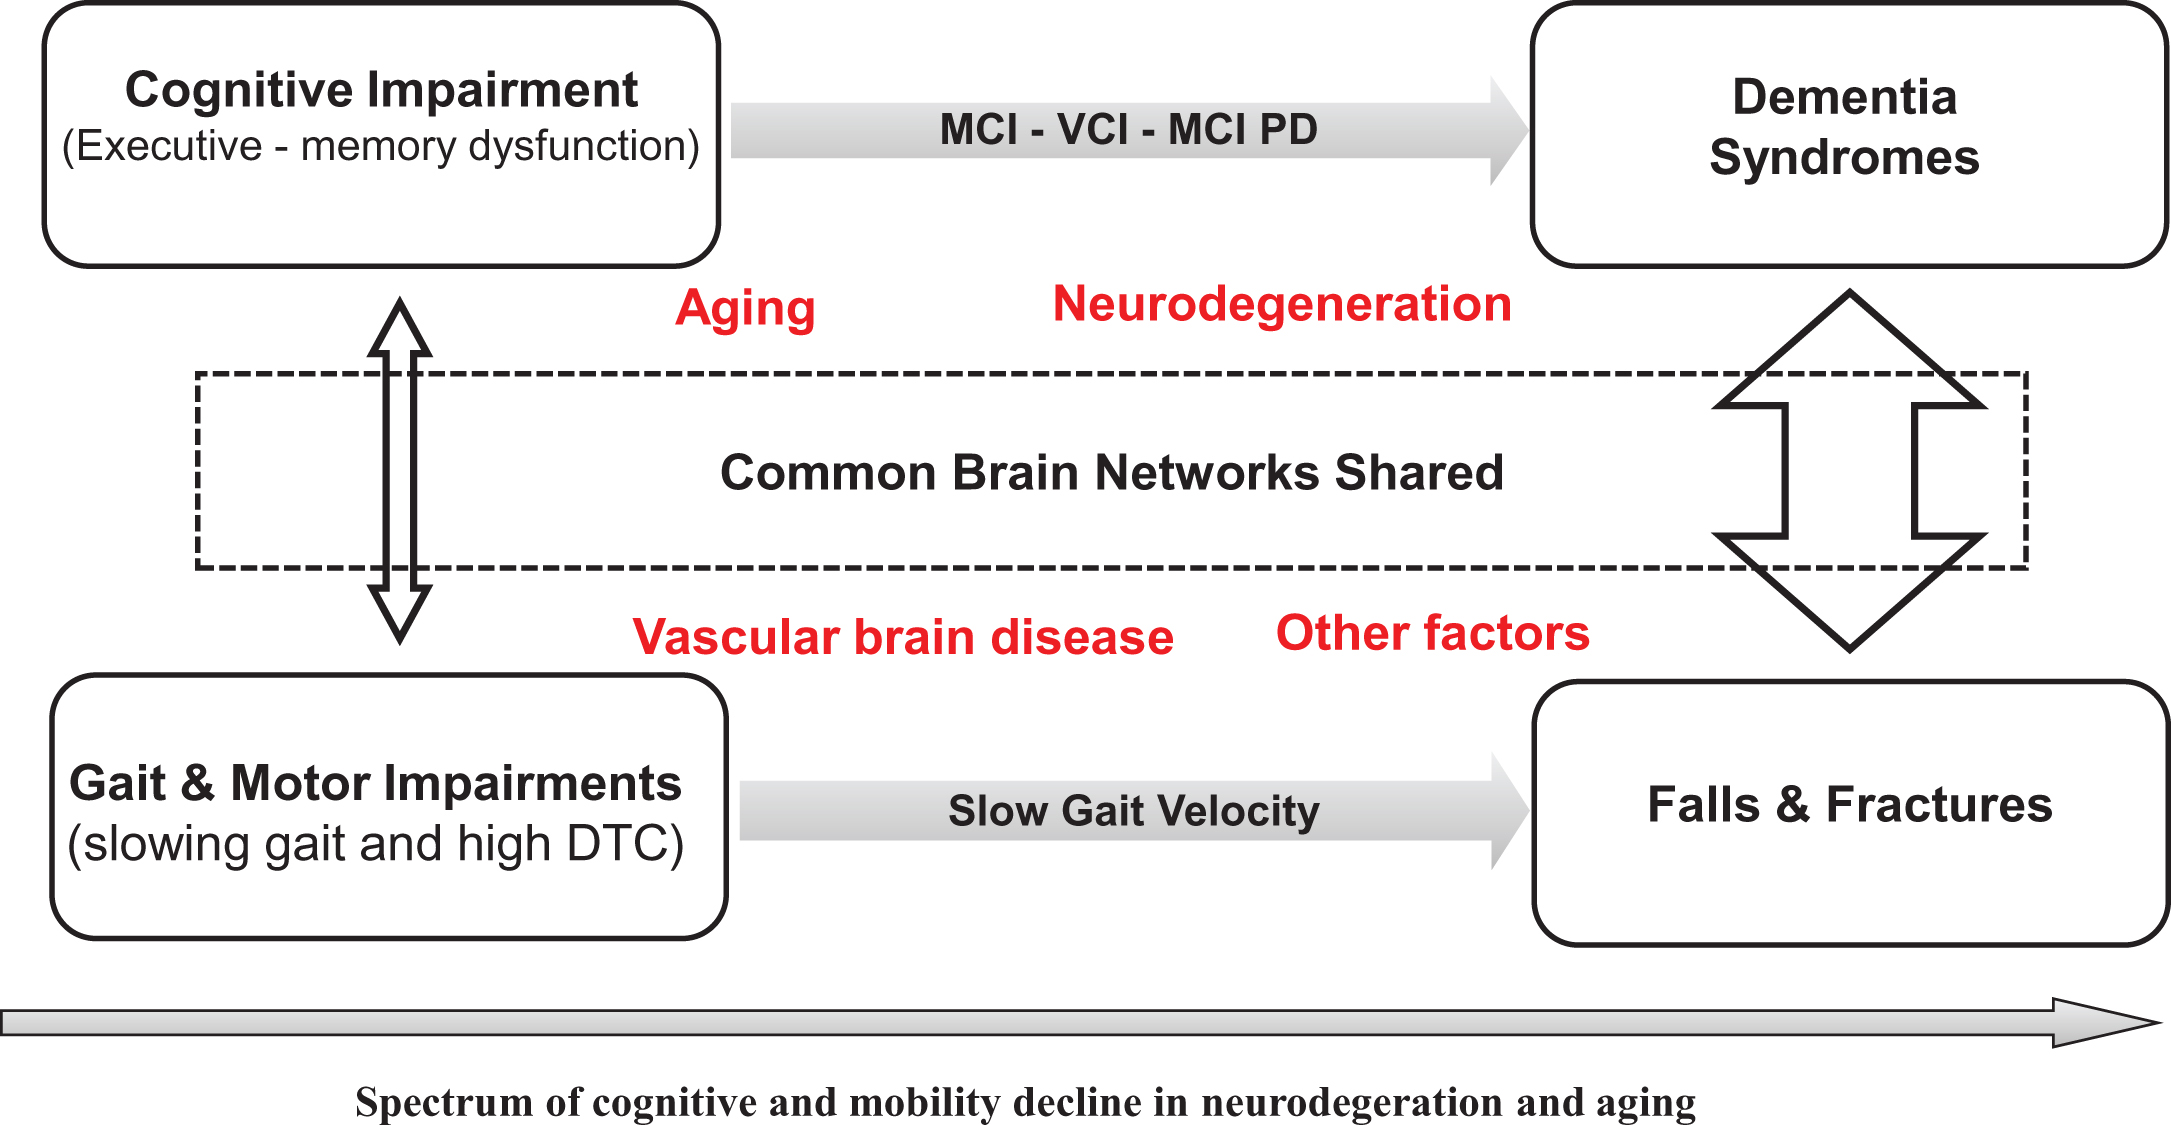 Potential mechanism affecting the common brain structures and networks that regulate gait control and cognitive performance. Adapted from Montero-Odasso et al. [5].